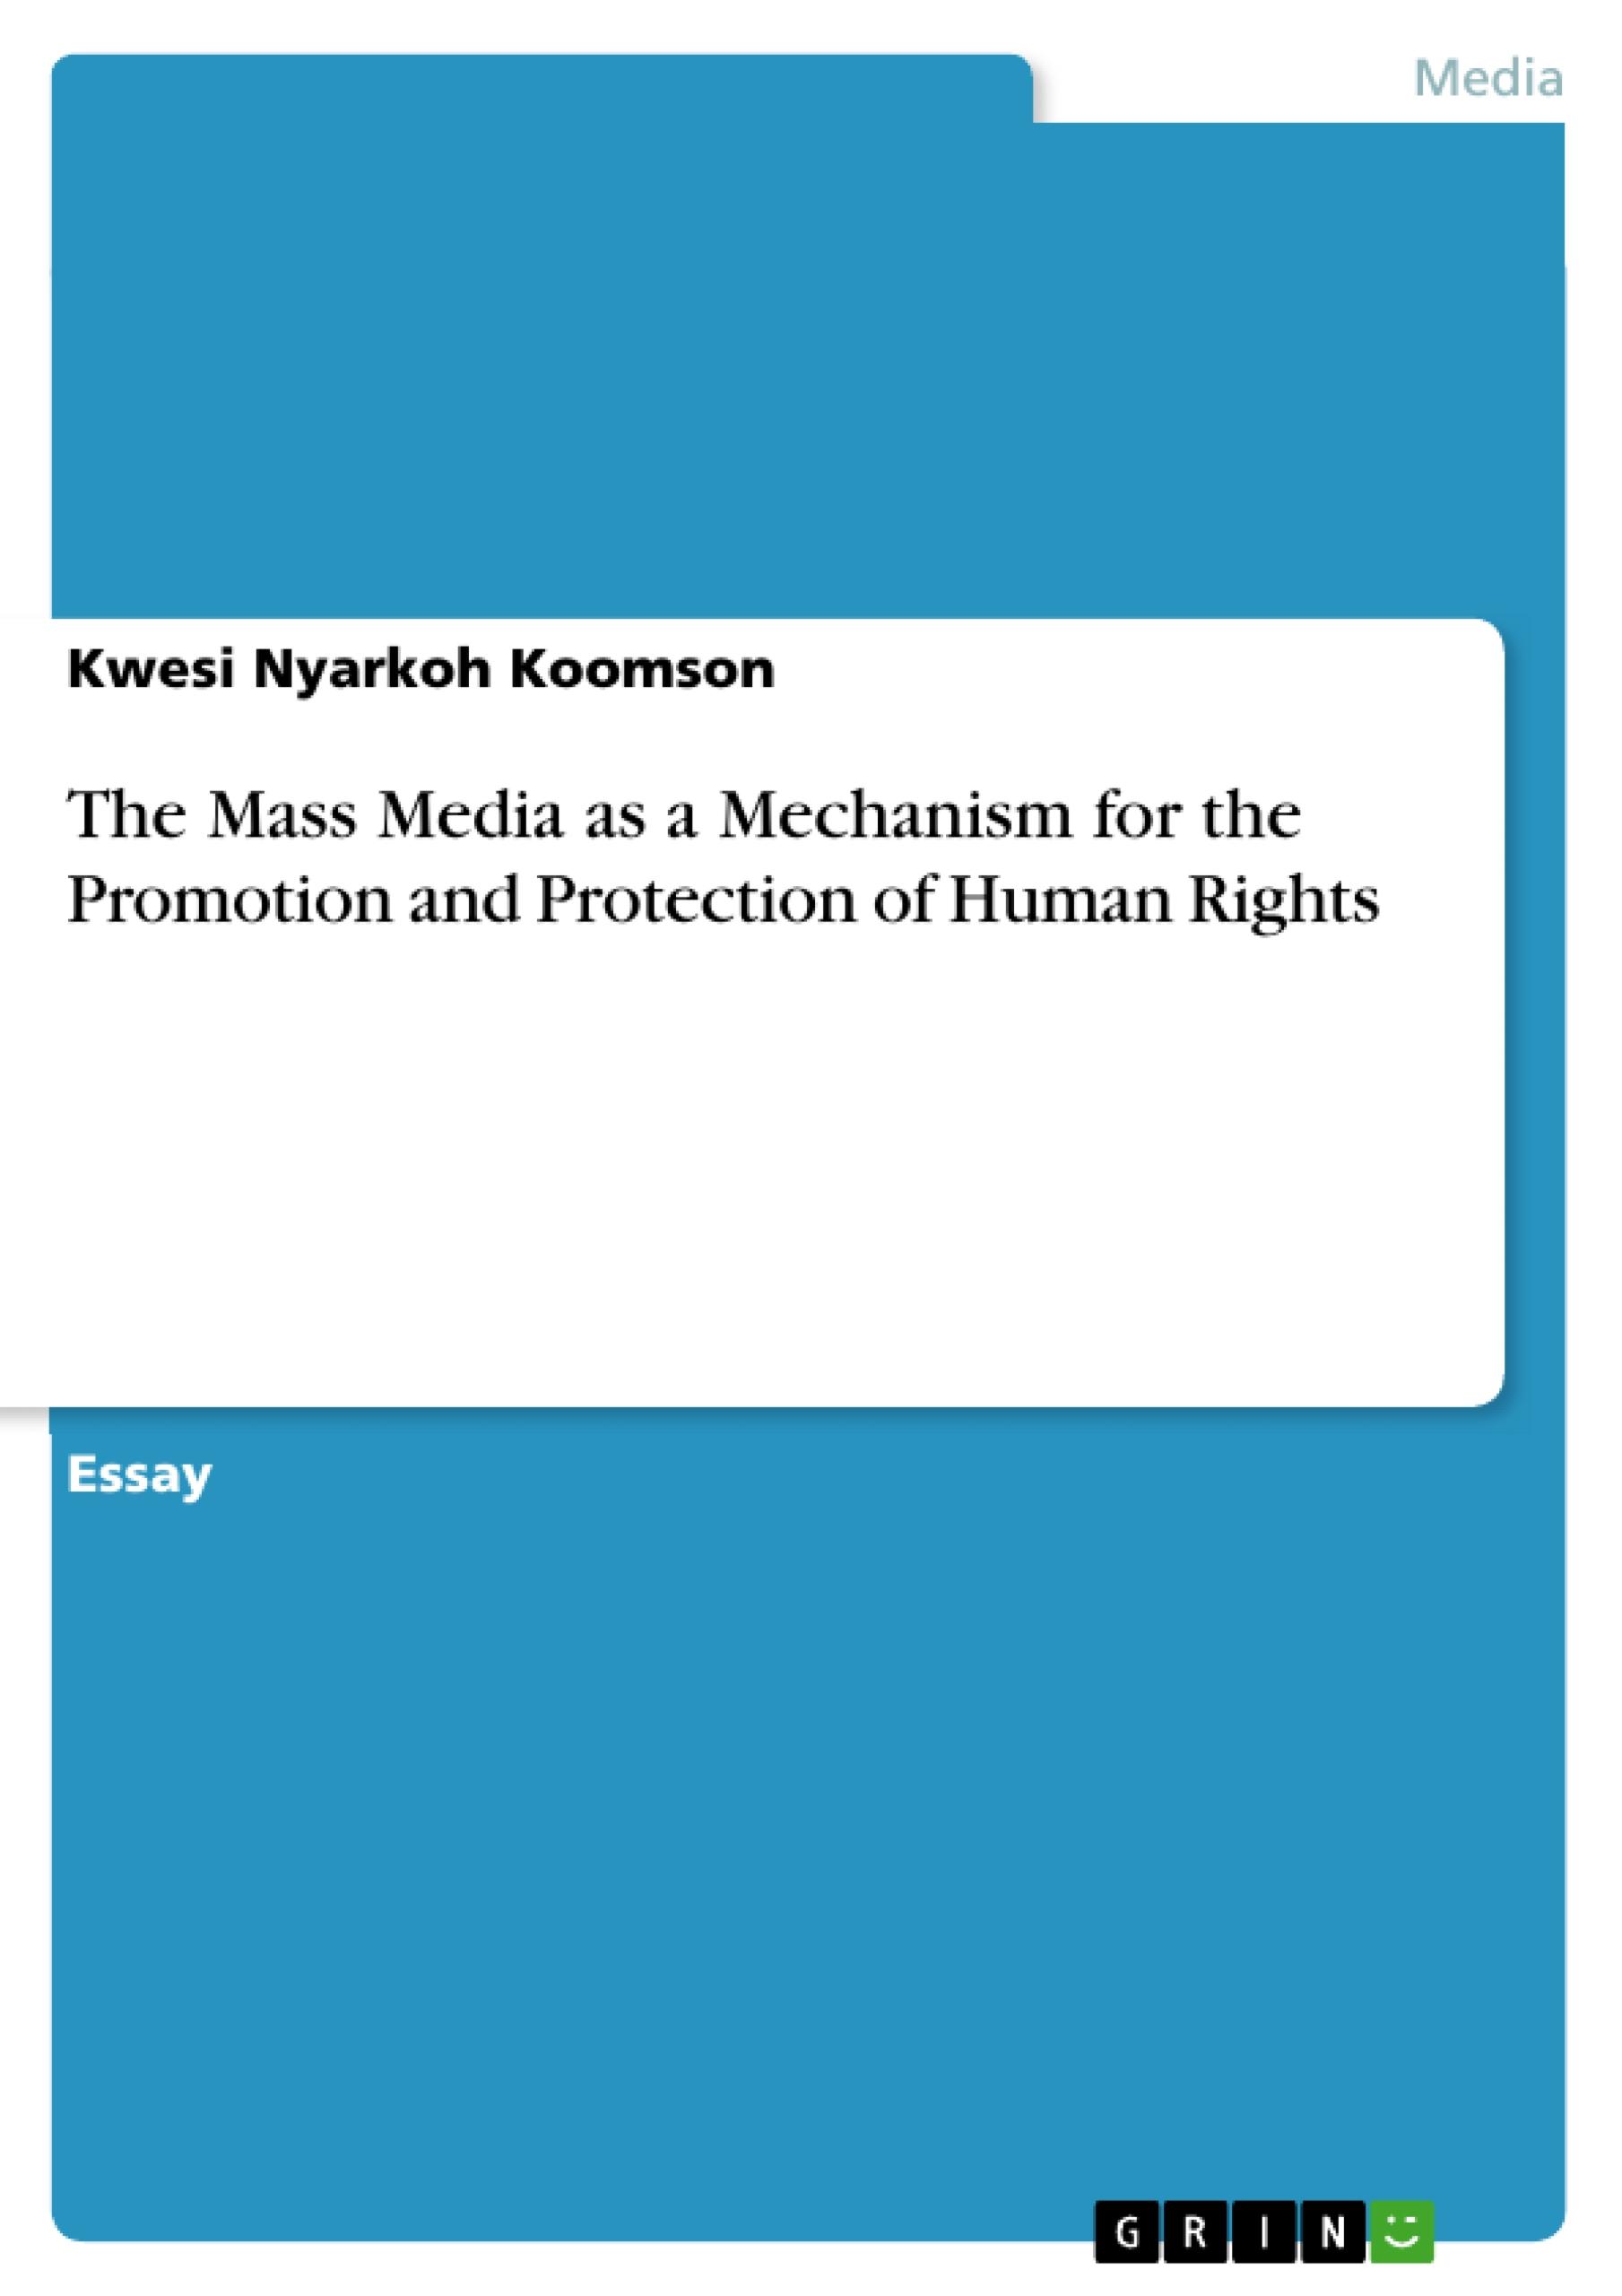 The Mass Media as a Mechanism for the Promotion and Protection of Human Rights  Kwesi Nyarkoh Koomson  Broschüre  Englisch  2016 - Nyarkoh Koomson, Kwesi